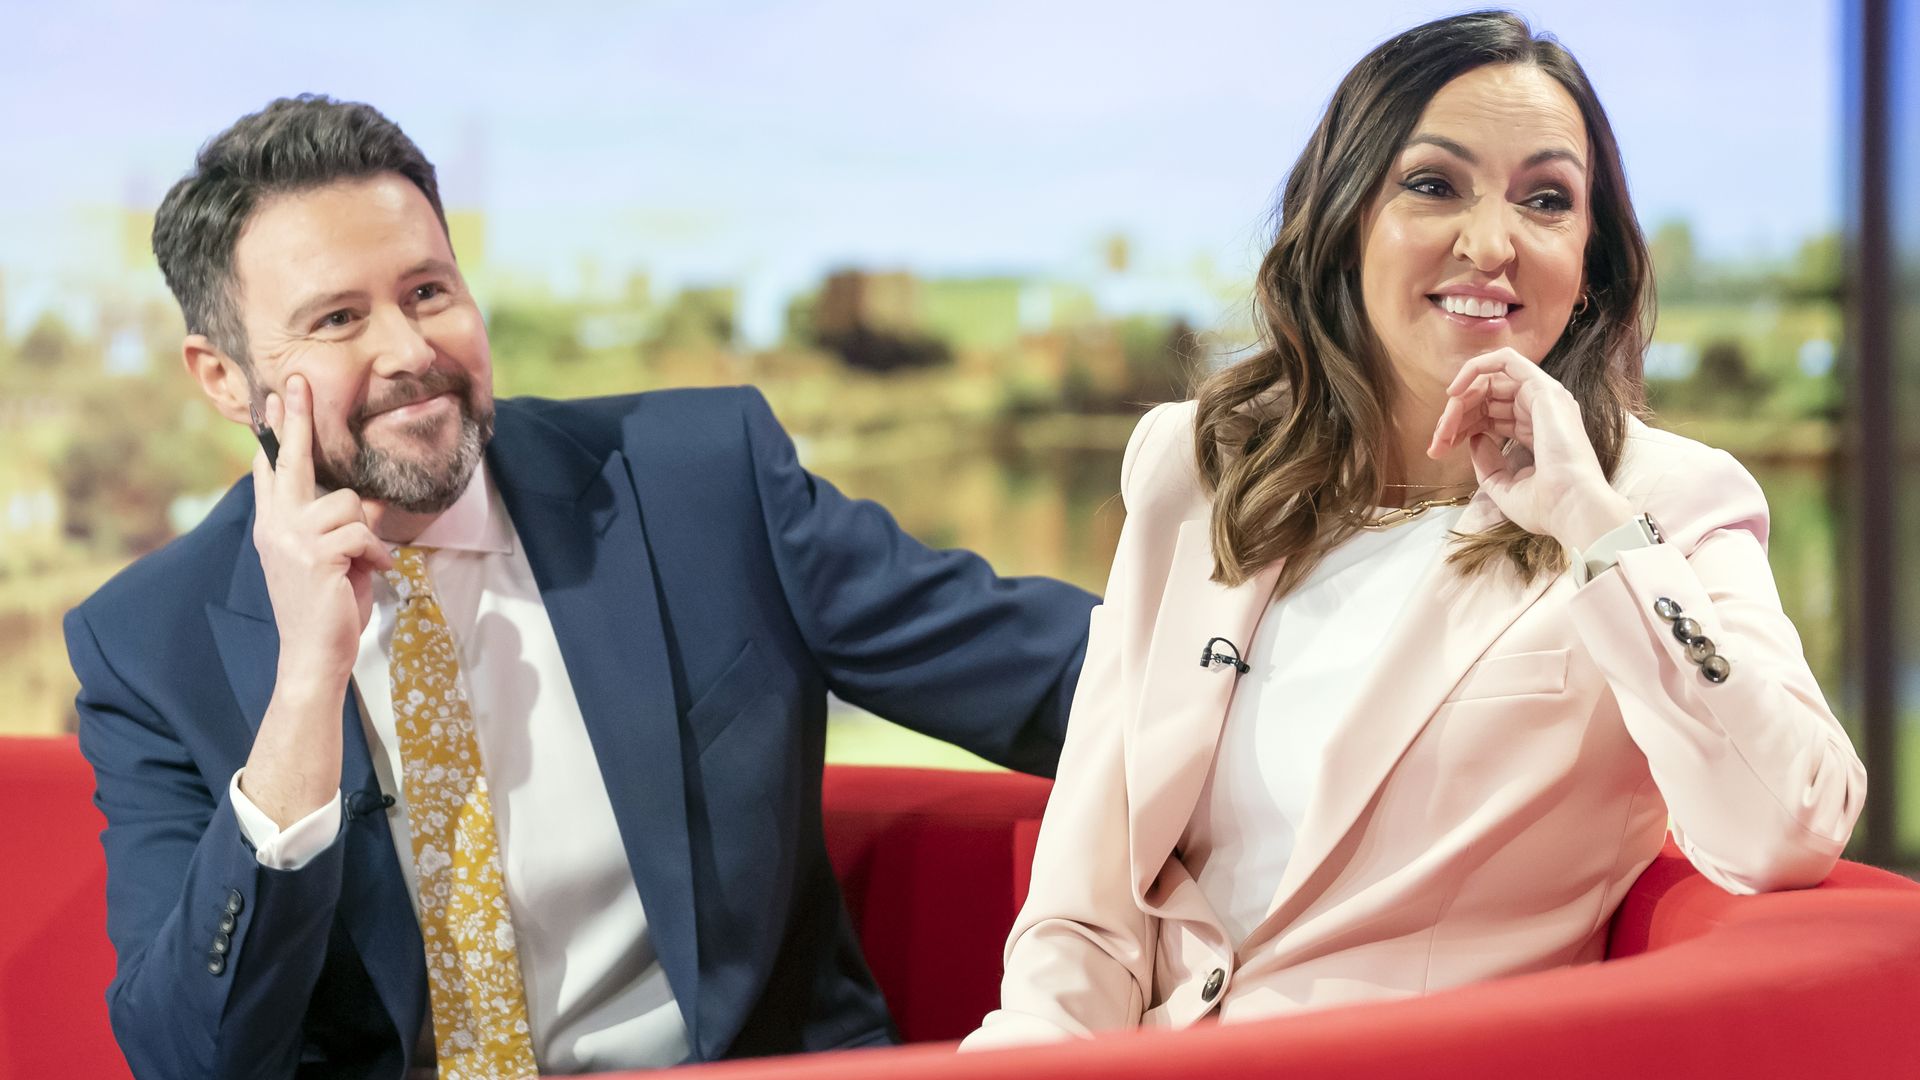 Jon Kay and Sally Nugent on the red sofa as BBC Breakfast celebrate its 40th anniversary 